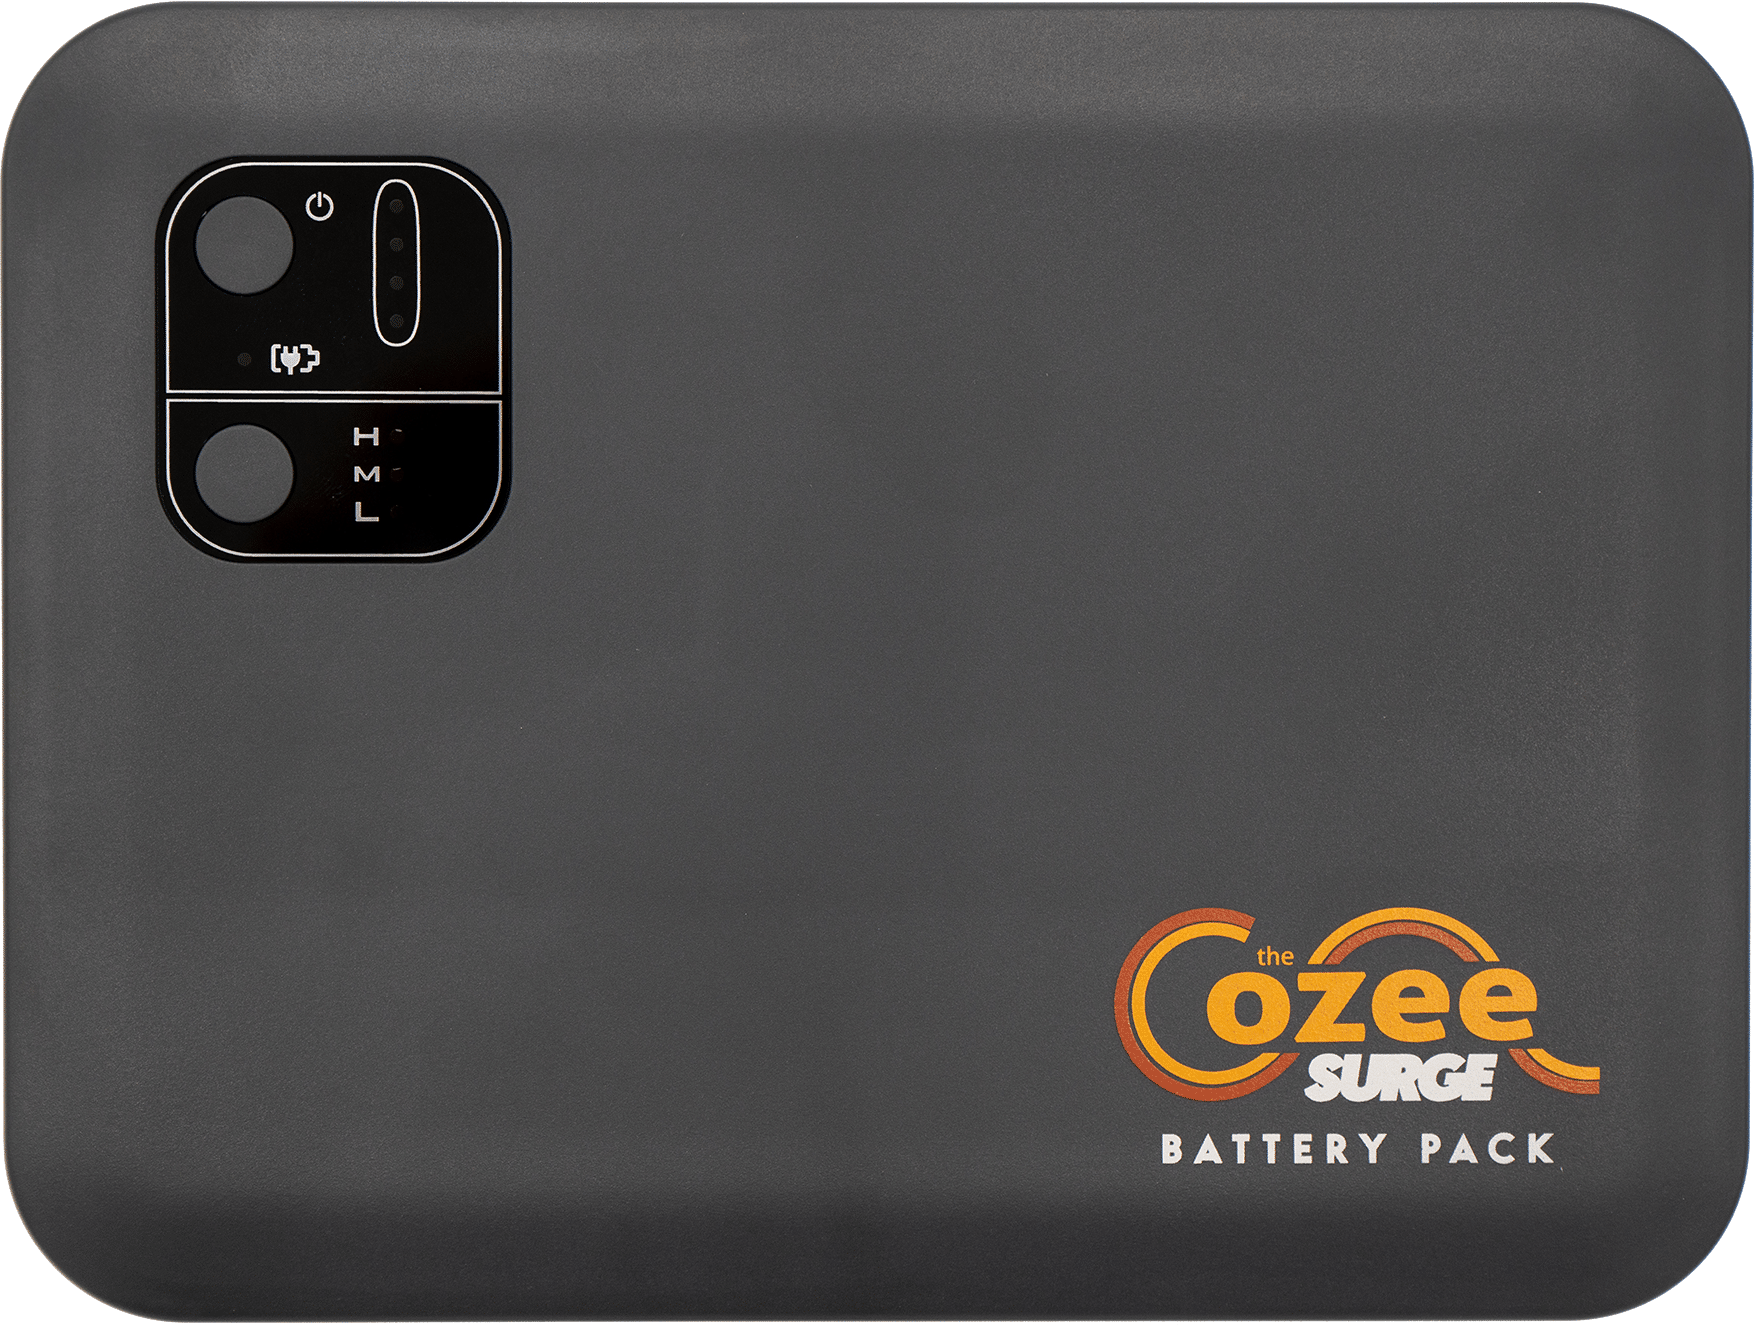 The Cozee Battery Powered Heating Blanket battery pack